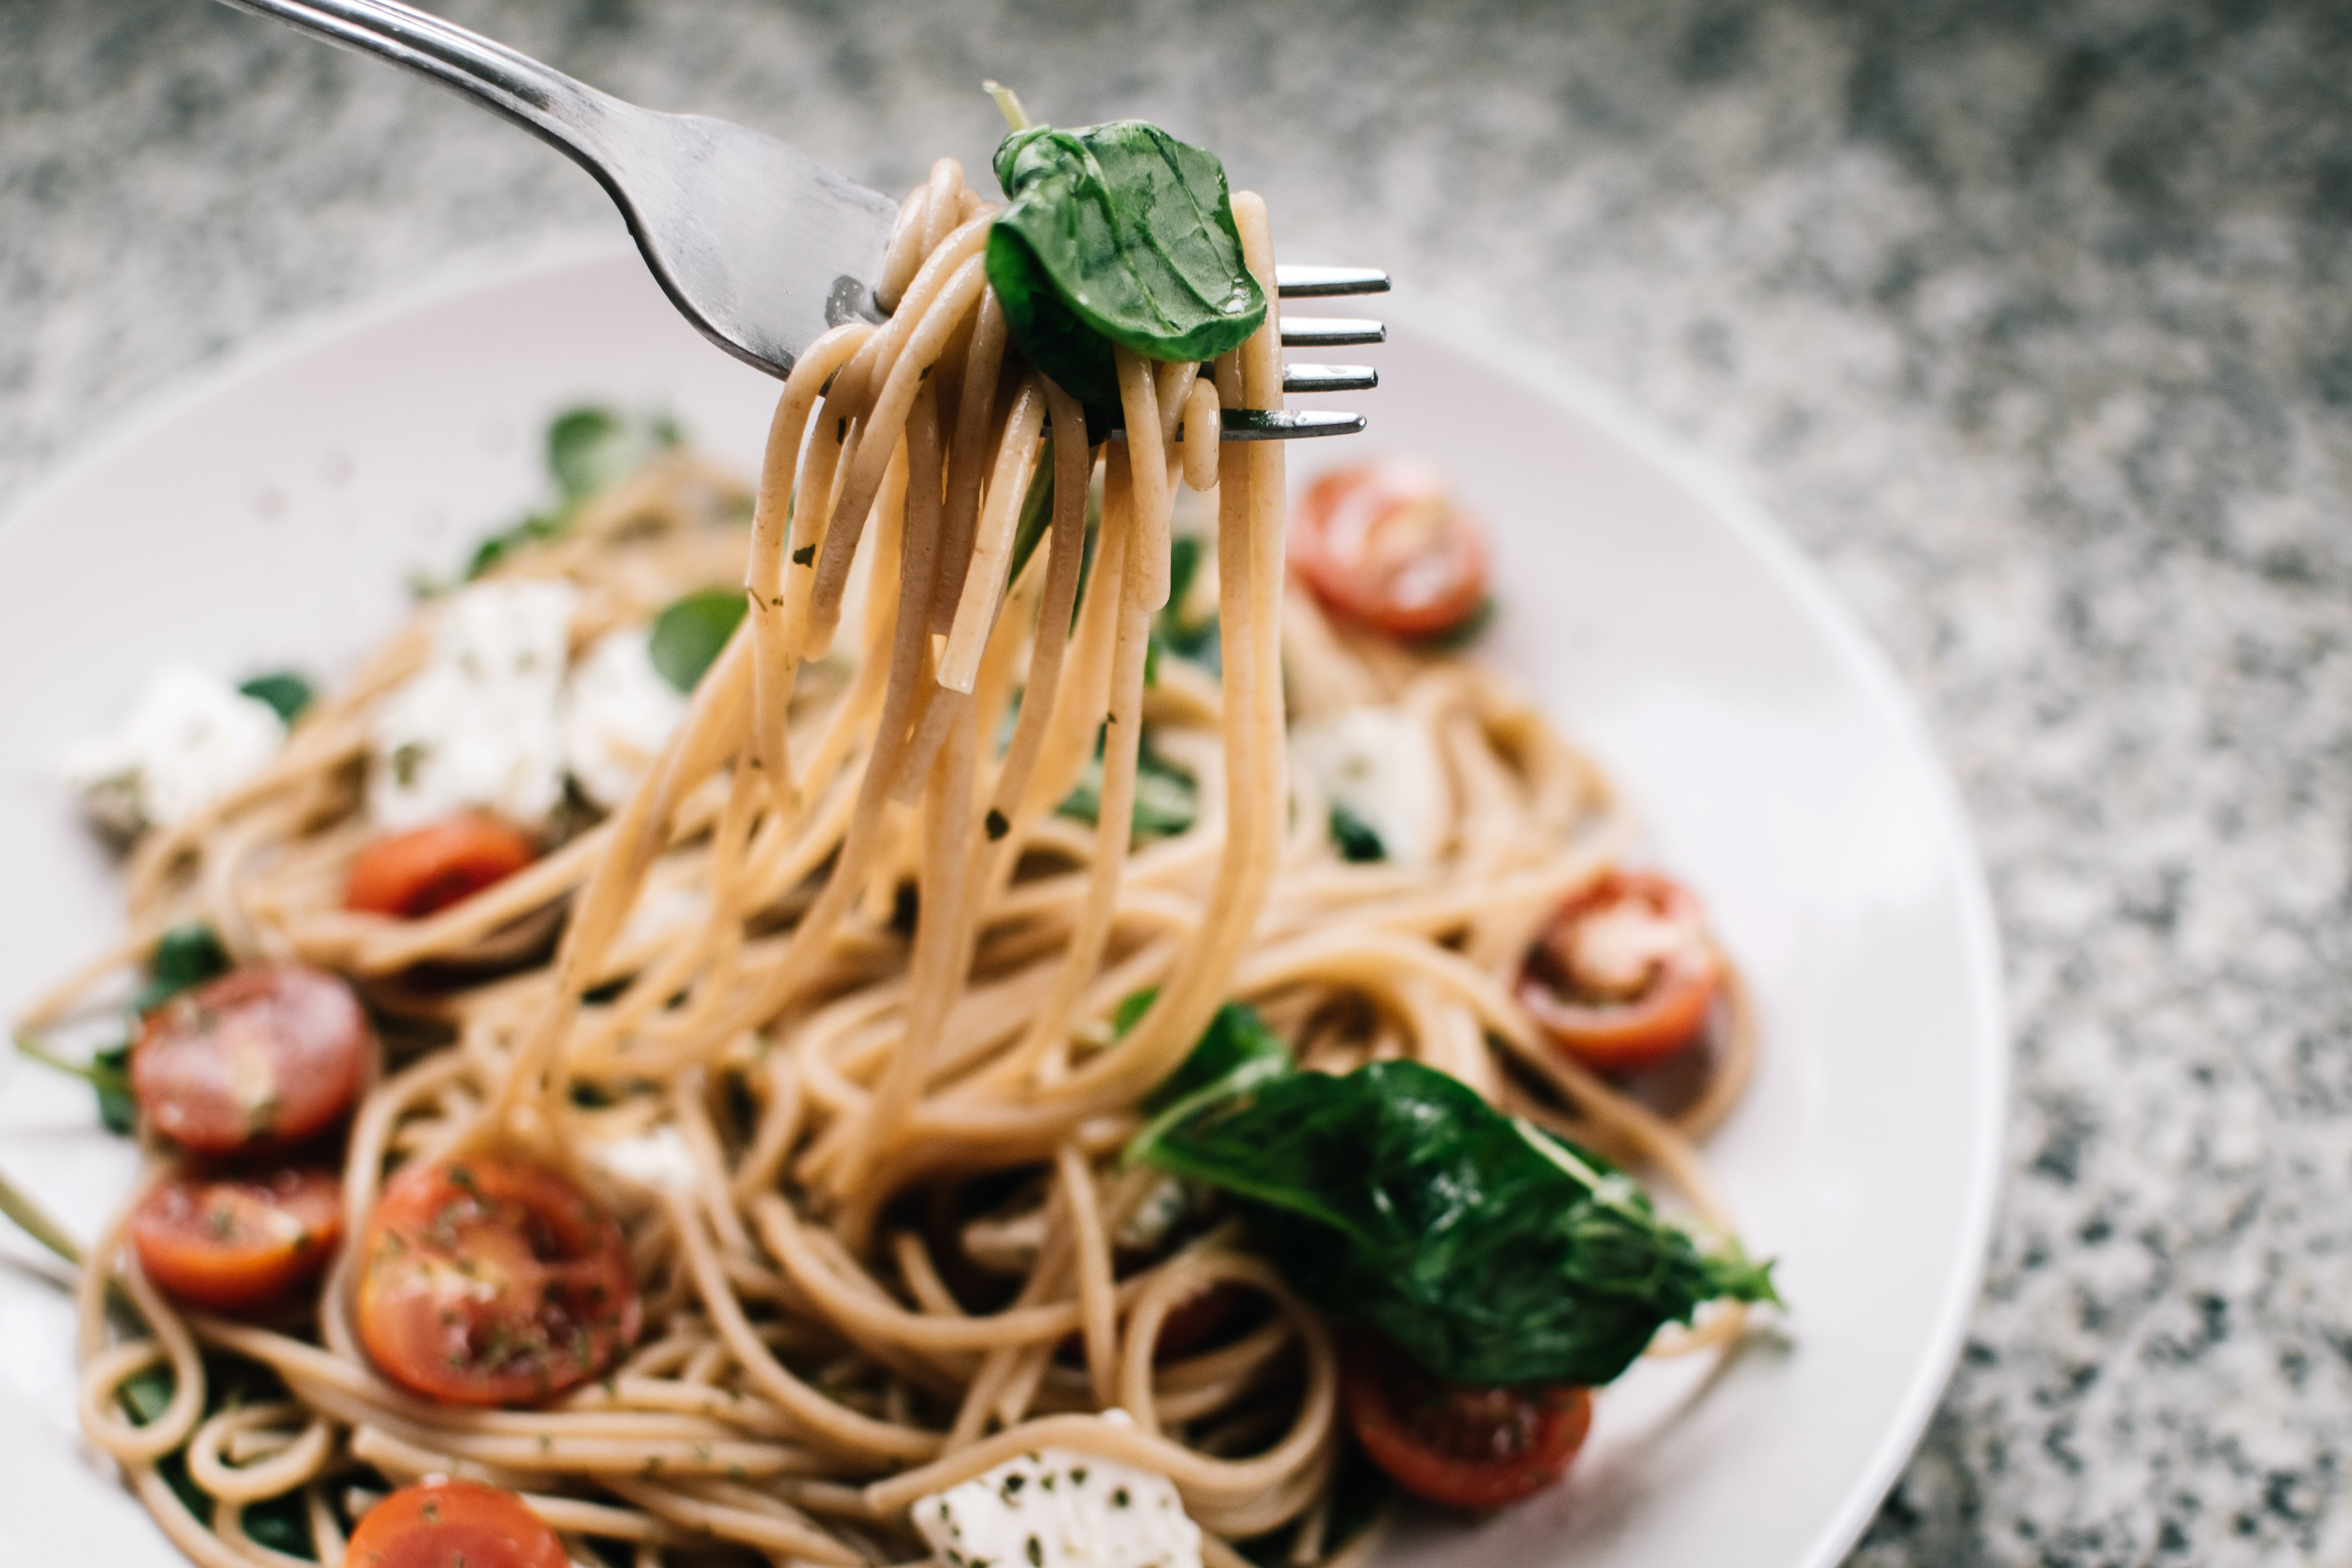 Image source: https://www.pexels.com/photo/selective-focus-photography-of-pasta-with-tomato-and-basil-1279330/    Caption: Pasta in Italian Restaurants in London